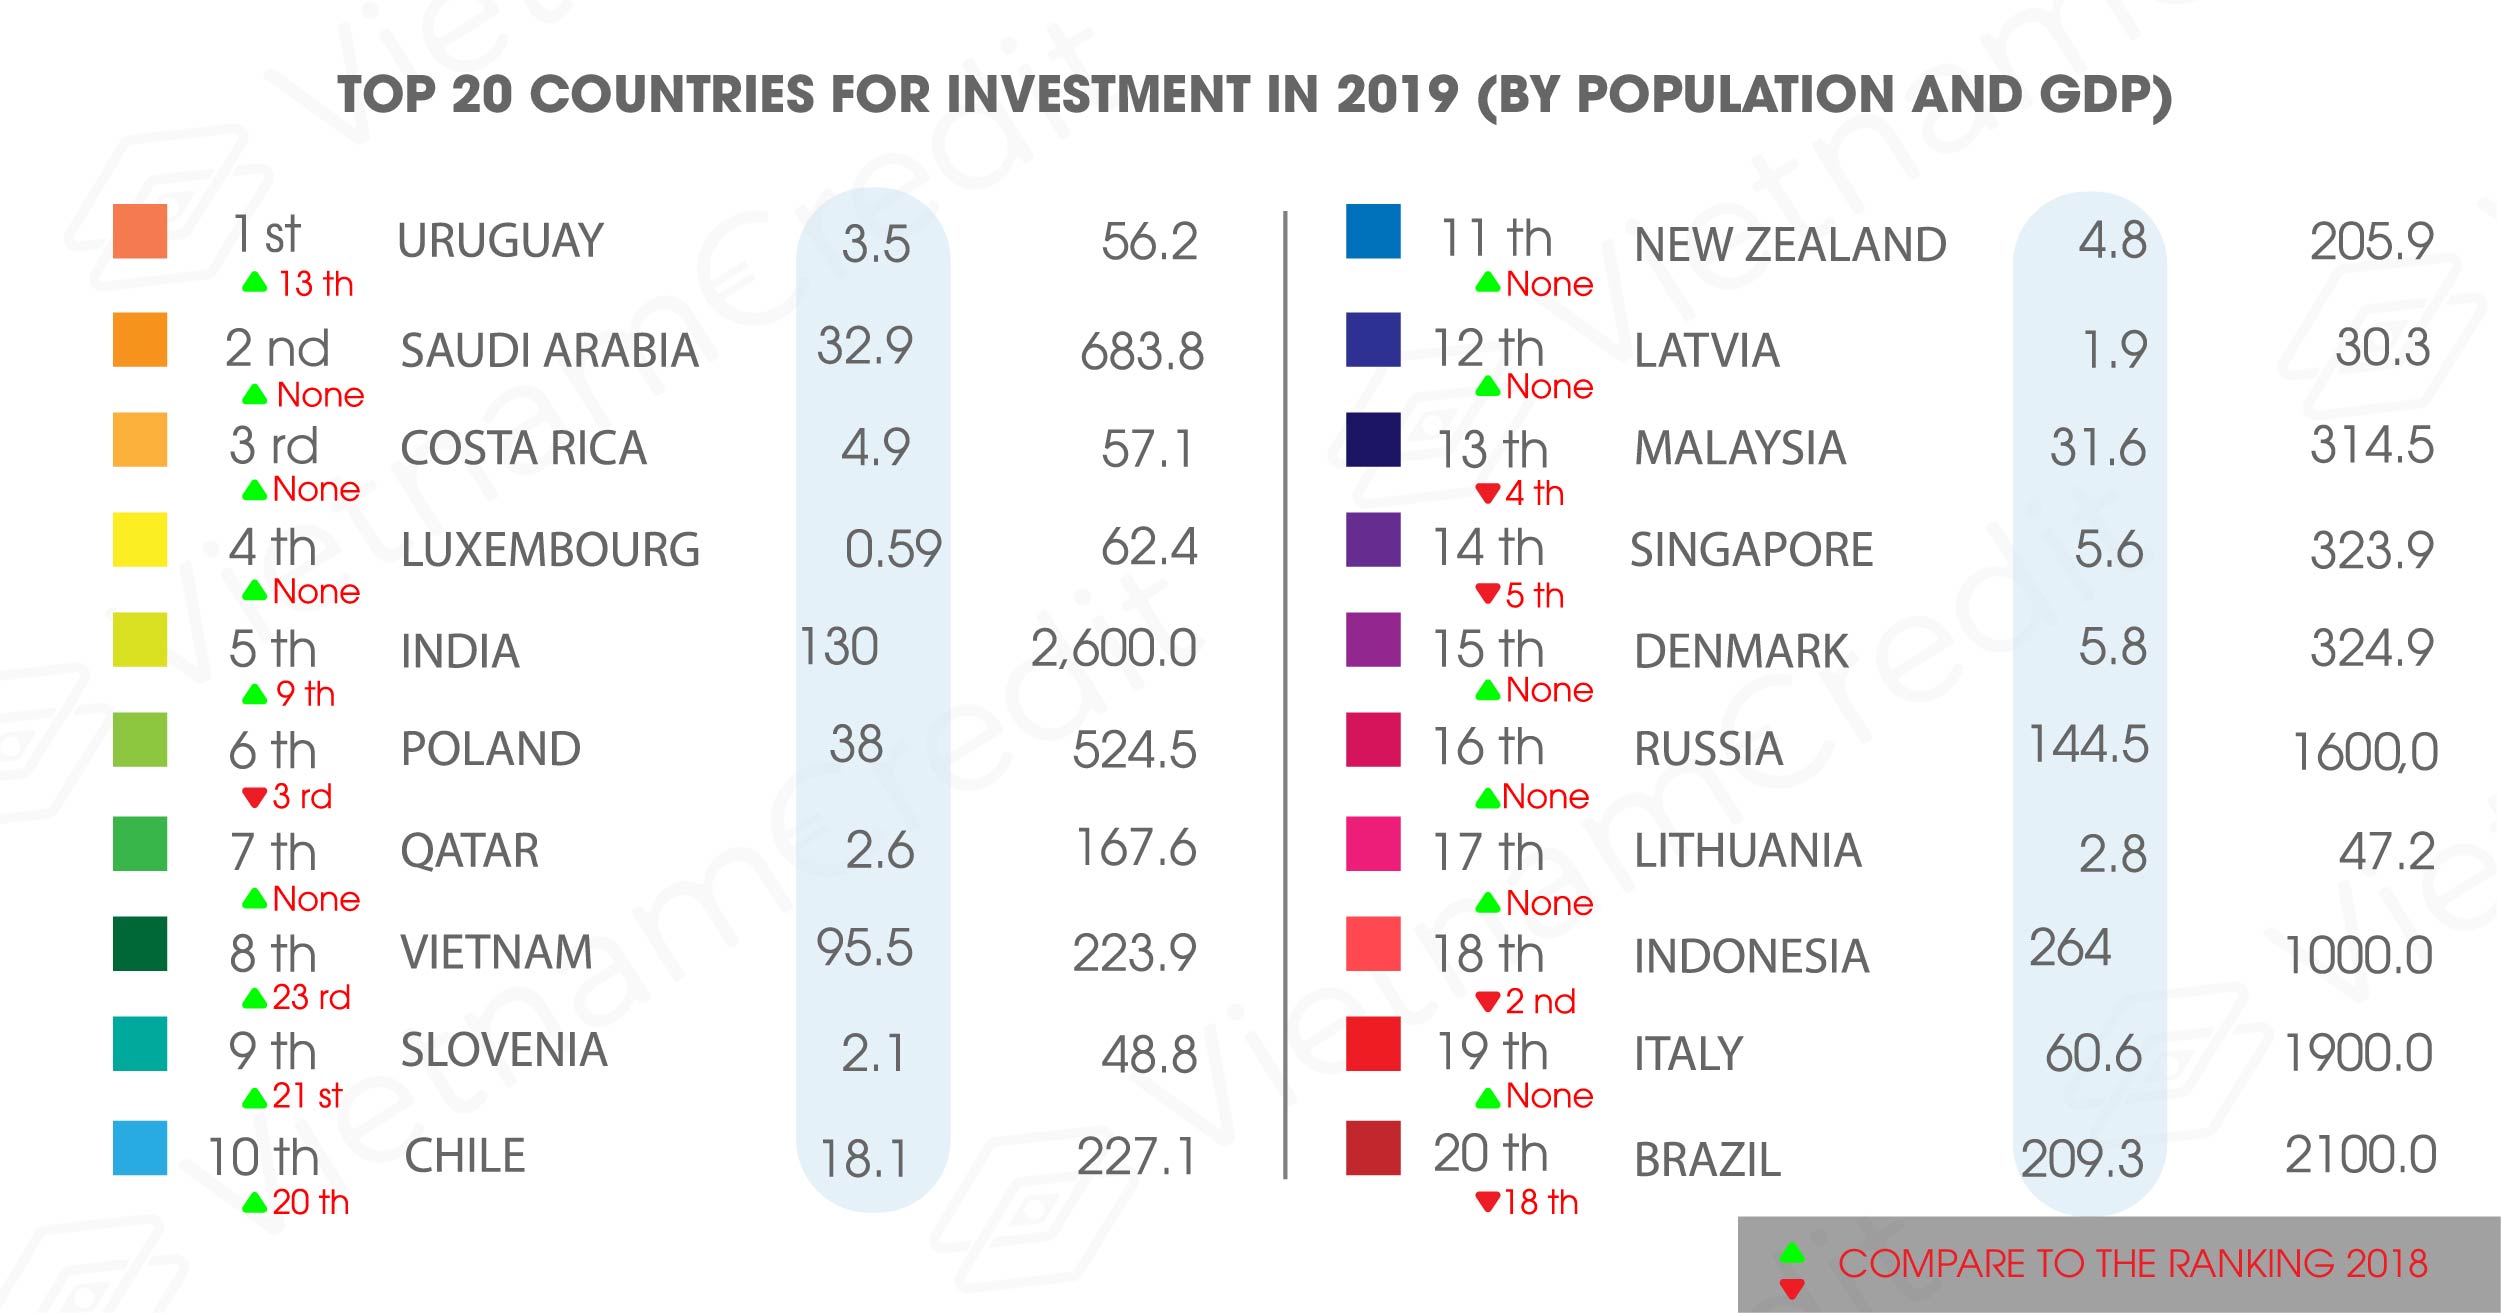 Vietnam: the 8th best countries for investment in 2019